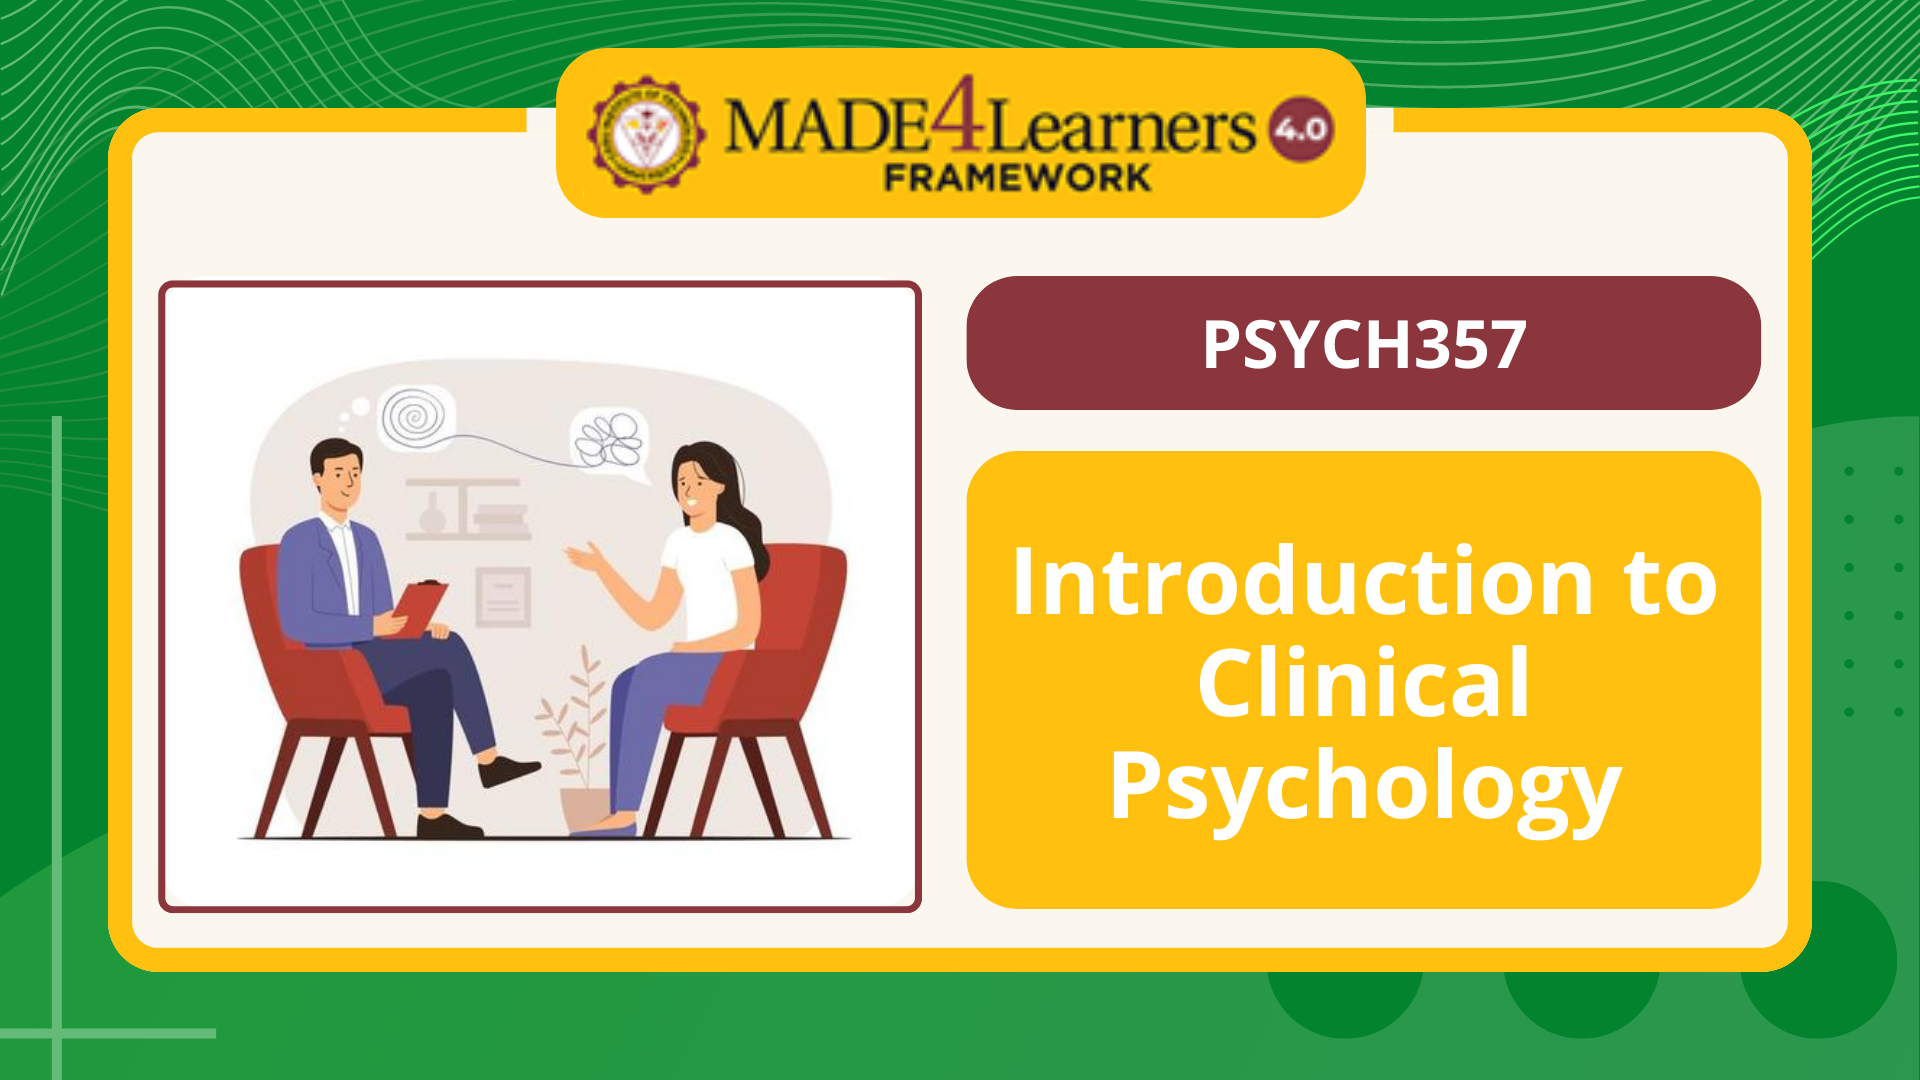 PSYCH357 Introduction to Clinical Psychology (E4-C2 AP3)